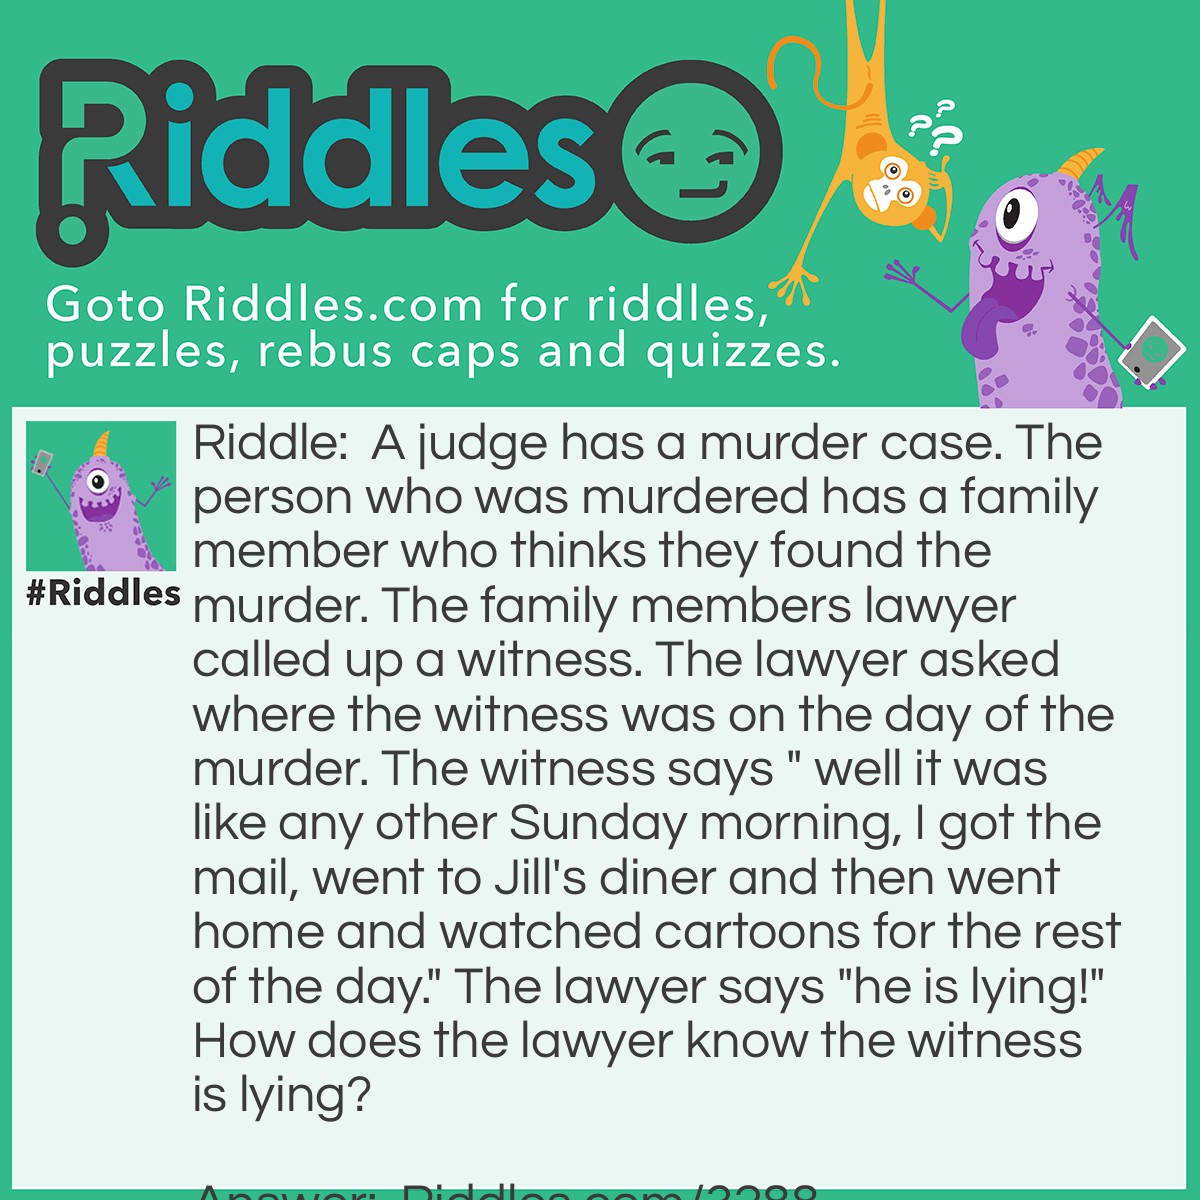 Riddle: A judge has a murder case. The person who was murdered has a family member who thinks they found the murder. The family members lawyer called up a witness. The lawyer asked where the witness was on the day of the murder. The witness says " well it was like any other Sunday morning, I got the mail, went to Jill's diner and then went home and watched cartoons for the rest of the day." The lawyer says "he is lying!" How does the lawyer know the witness is lying? Answer: The witness says he went to get the mail and there are no mail deliveries on sundays. Also Sunday cartoons are only in the morning so how could the witness be watching them all day?